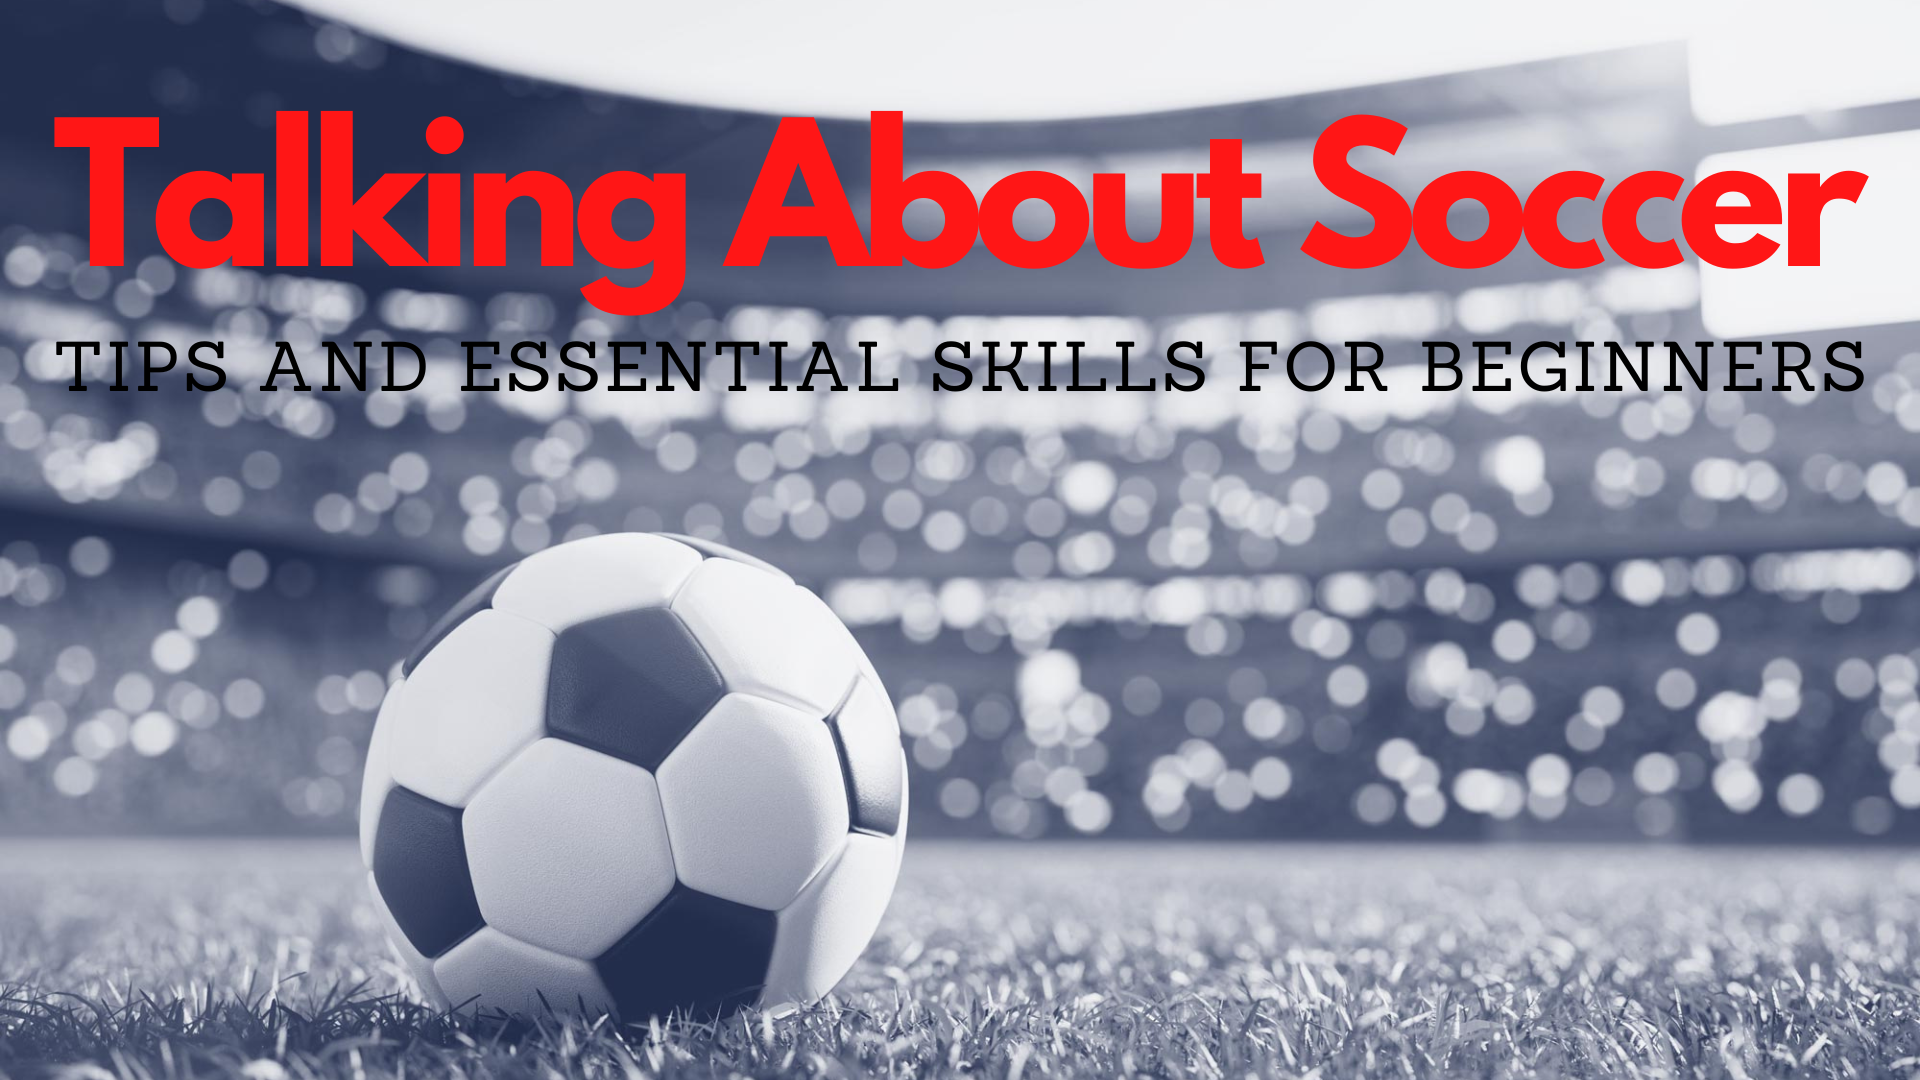 Talking About Soccer - Tips And Essential Skills For Beginners